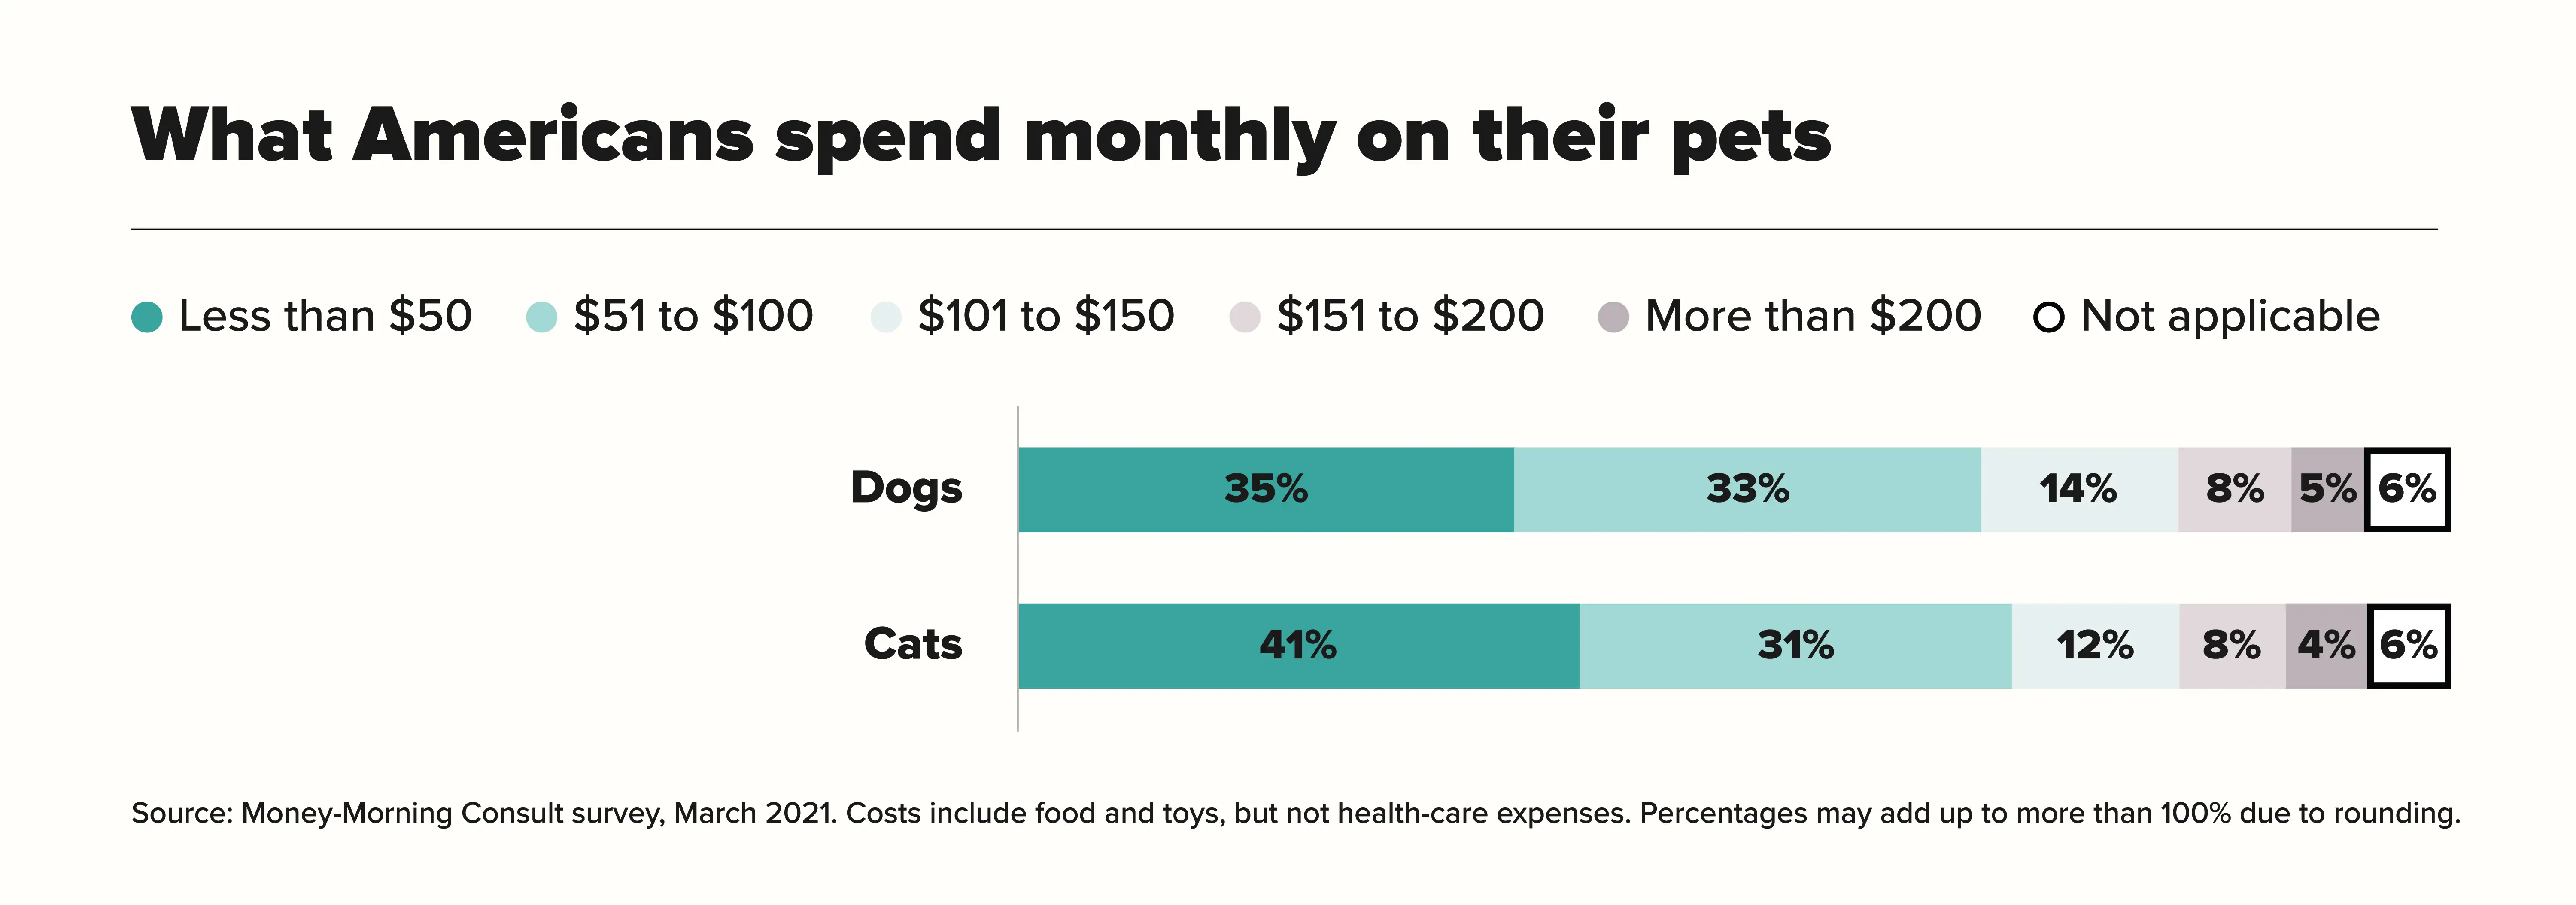 What Americans spend monthly on their pets chart